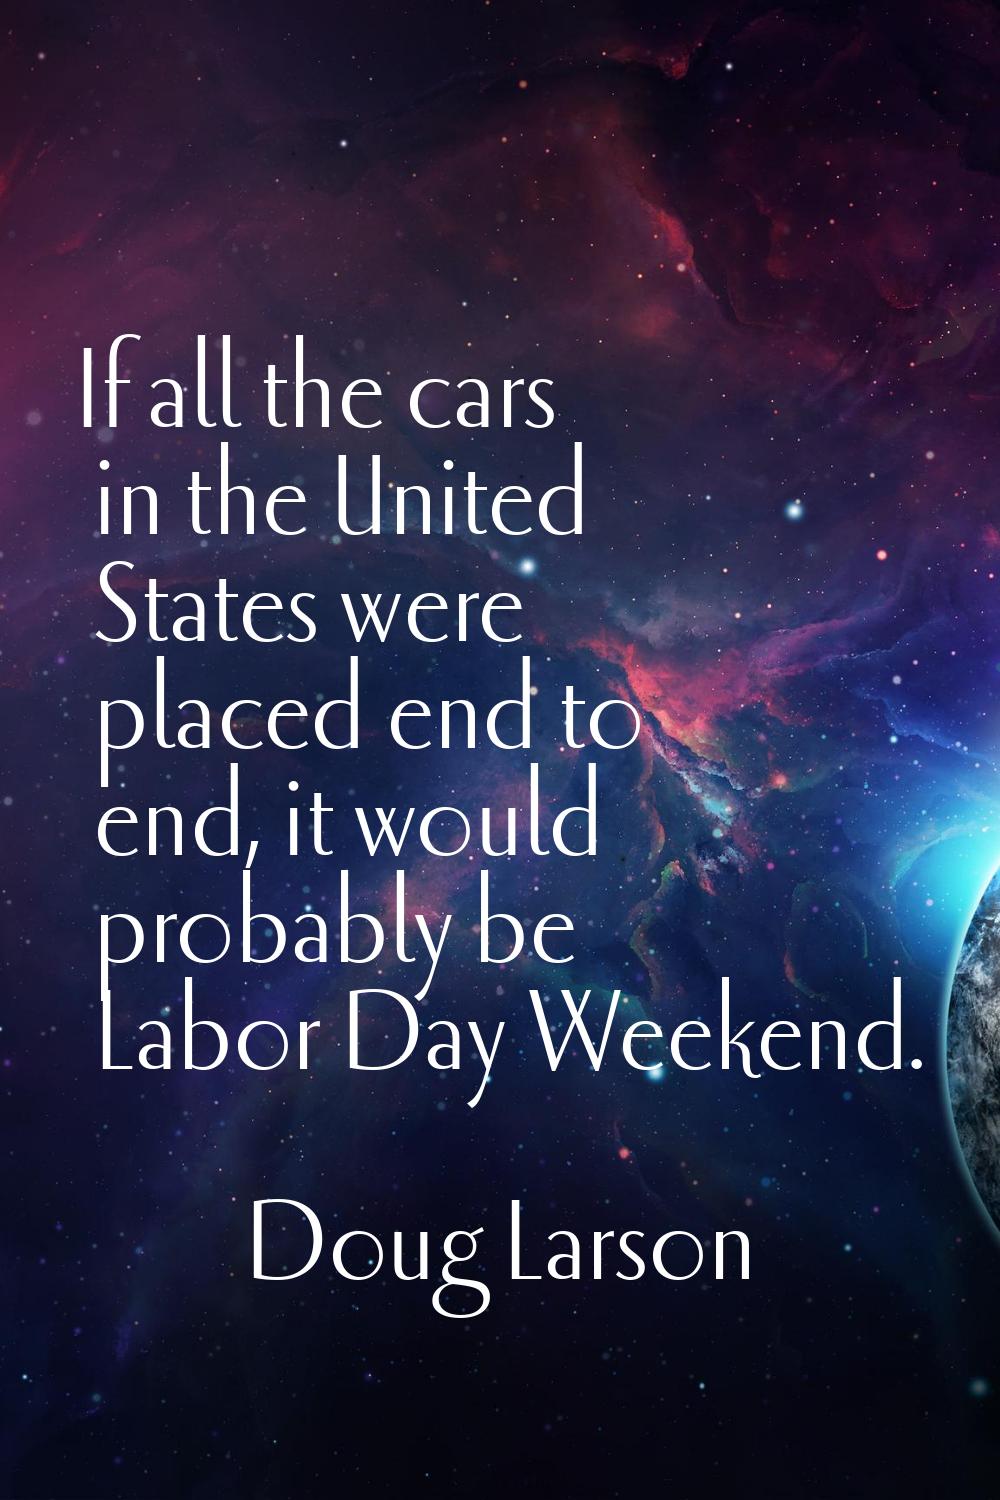 If all the cars in the United States were placed end to end, it would probably be Labor Day Weekend